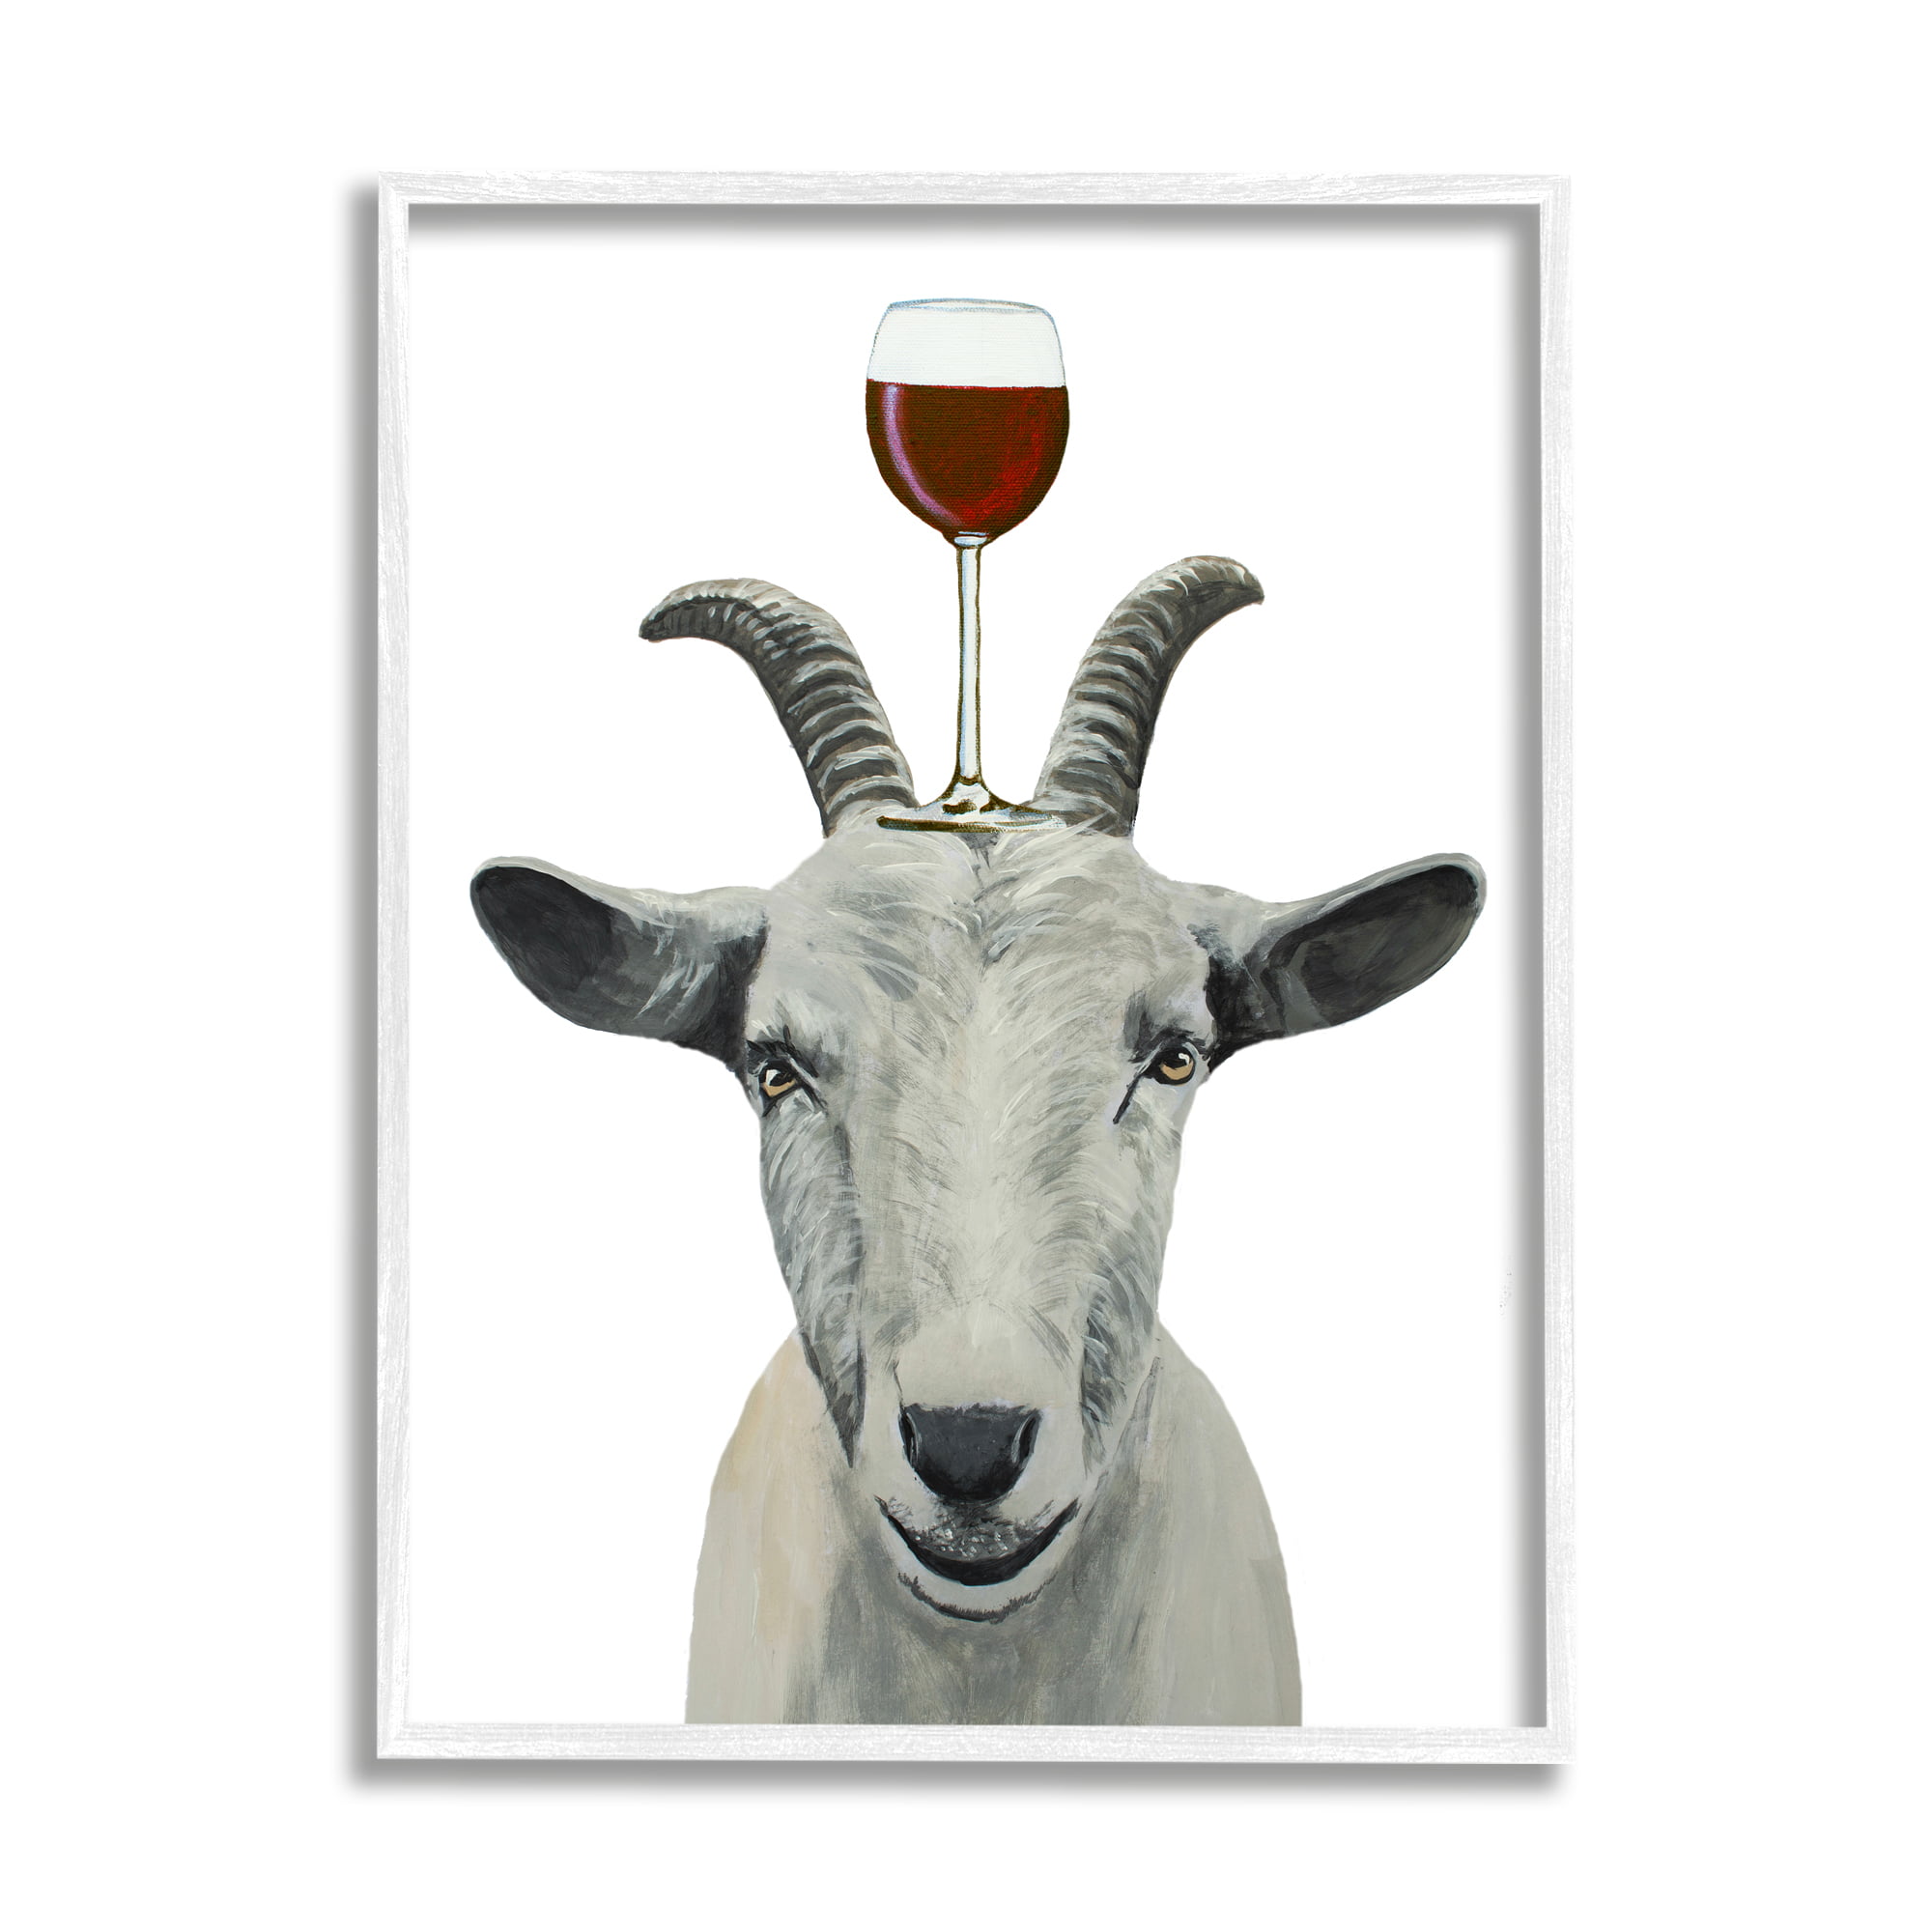 Stupell Industries Cute Farm Pig Looking Holding Wine Glass , 13 x 19, Design by Coco de Paris